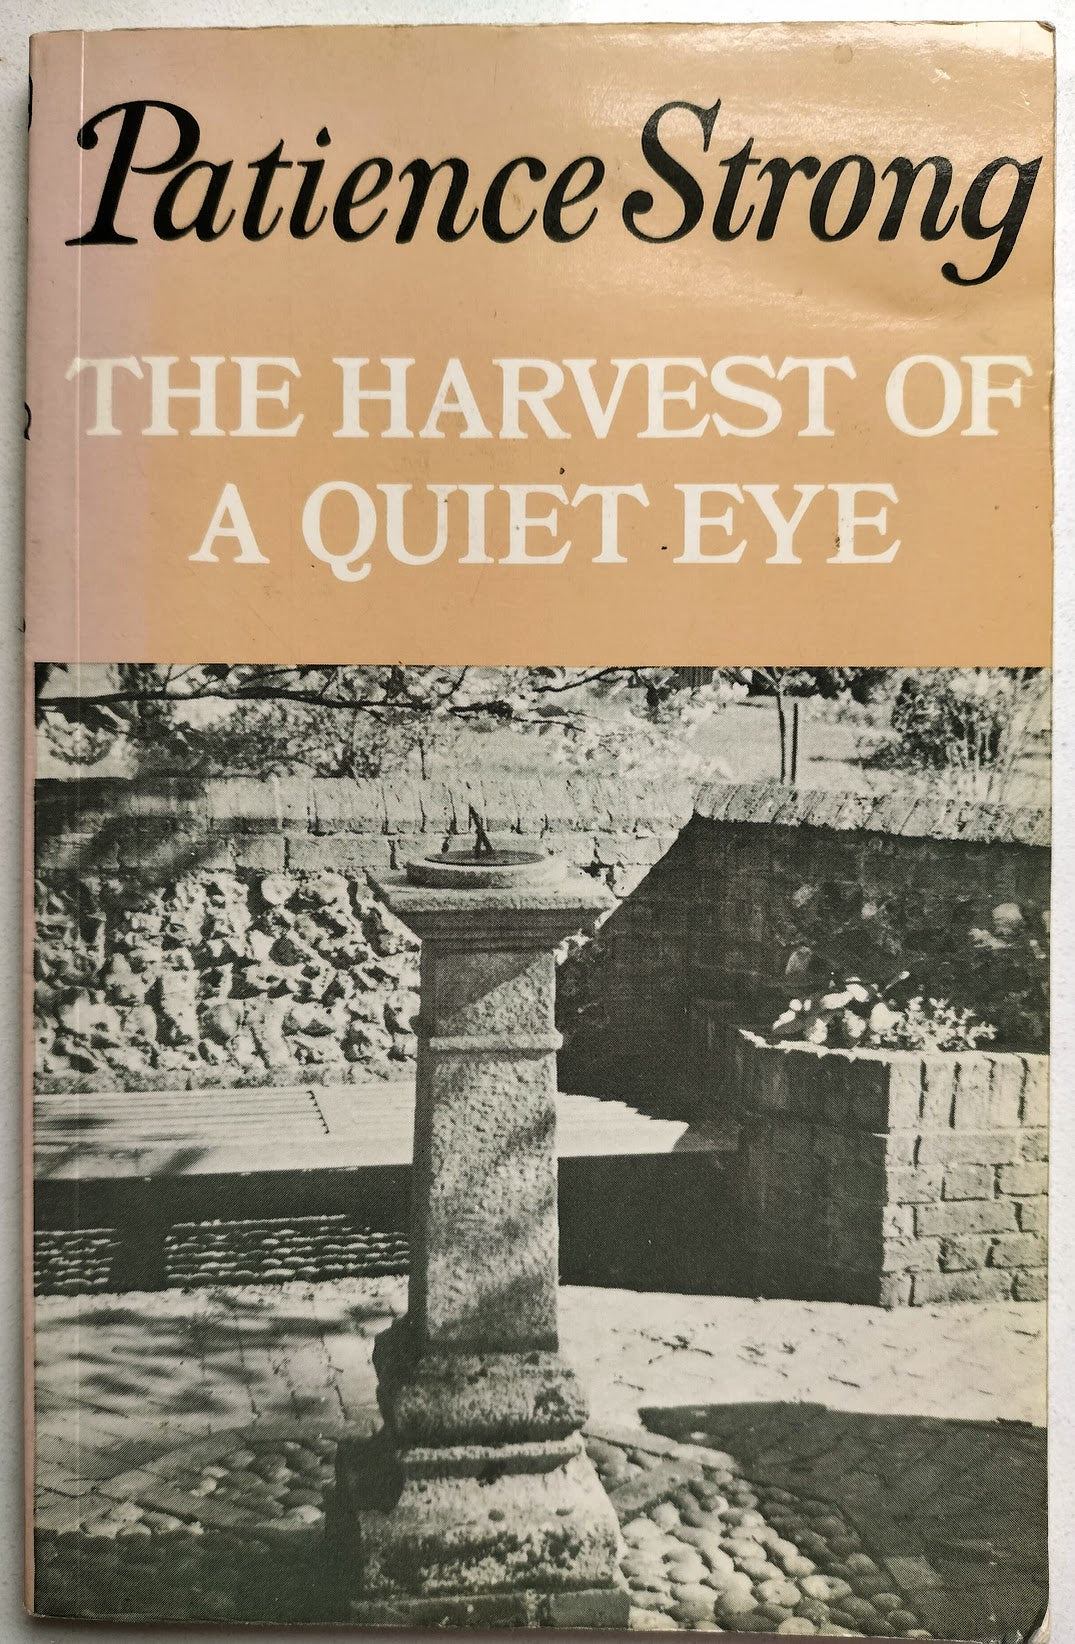 The Harvest of a Quiet Eye by Patience Strong